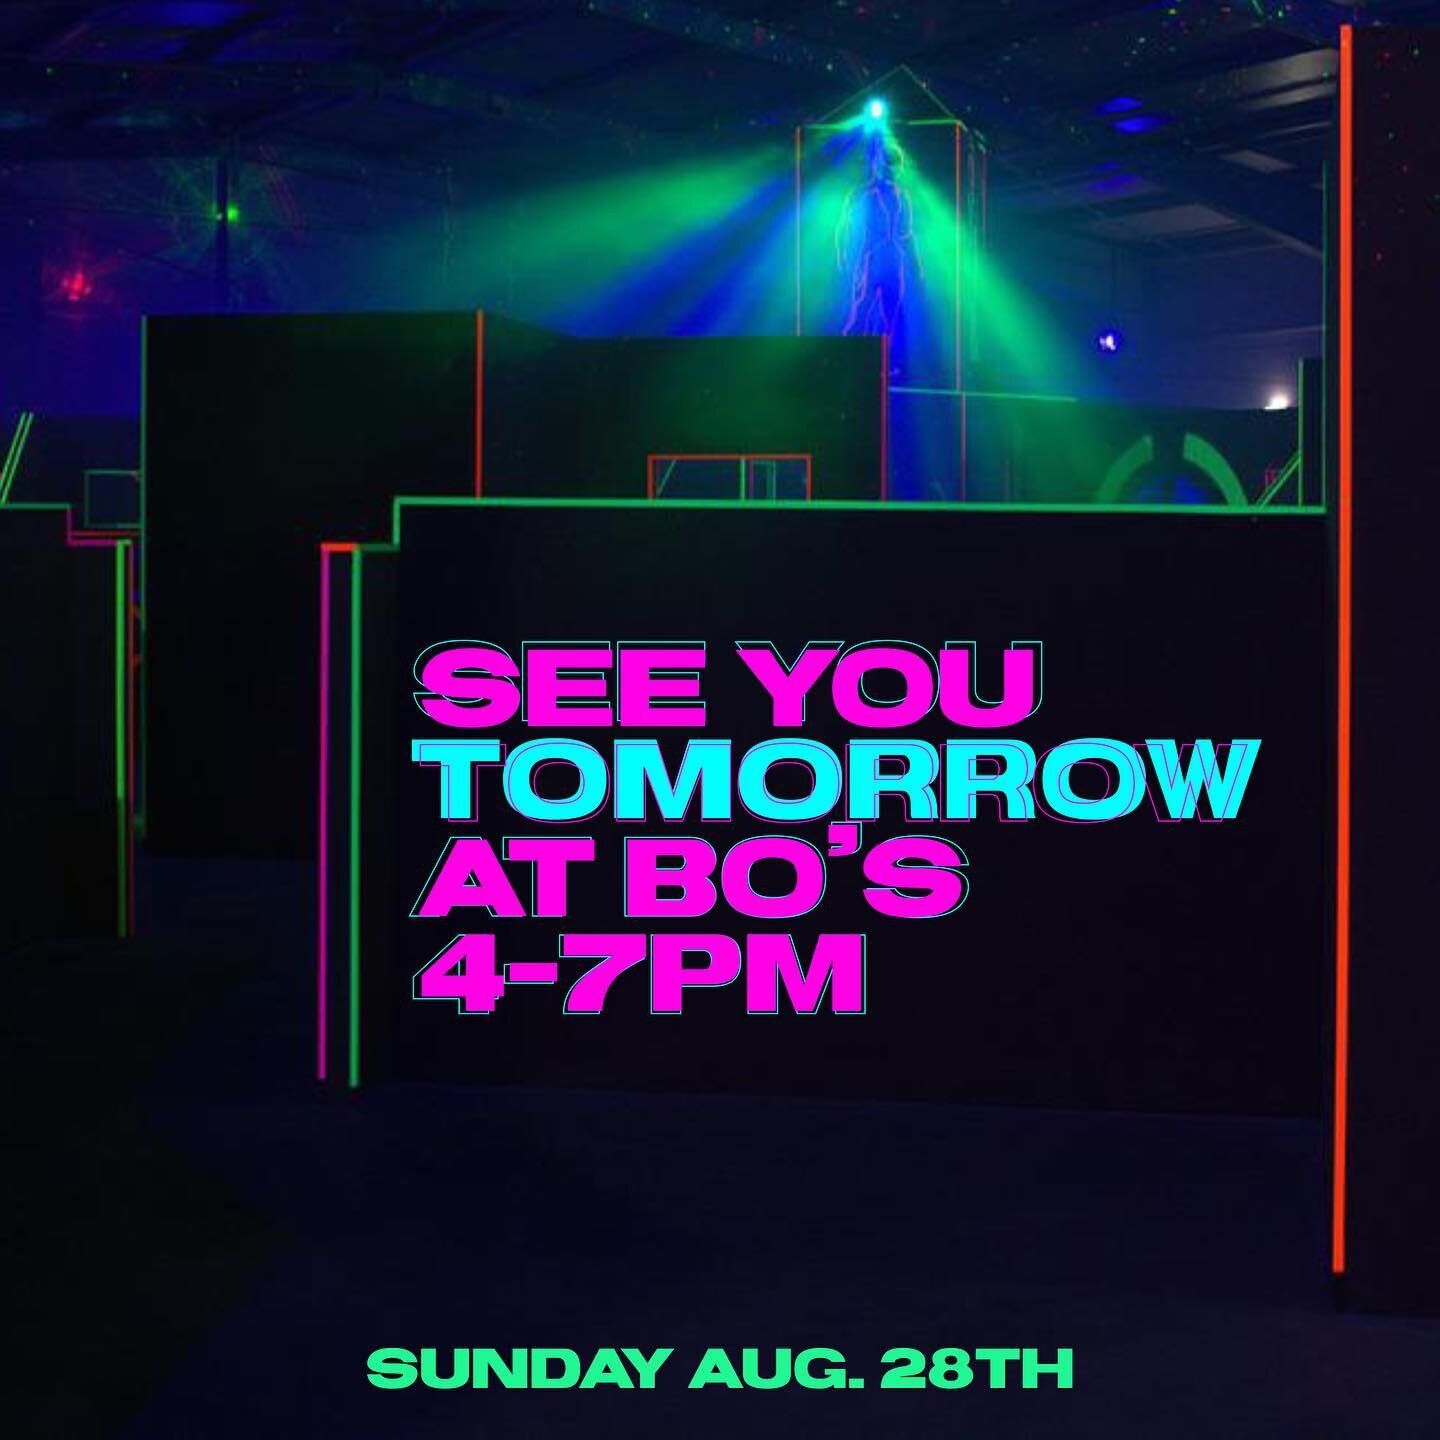 Tomorrow: Back to School Bash at Bo&rsquo;s! 4-7. $18 dollars for unlimited bowling, laser tag, mini golf and arcade!

*This is a parent chaperoned event, so bring your friends and family and meet us there!